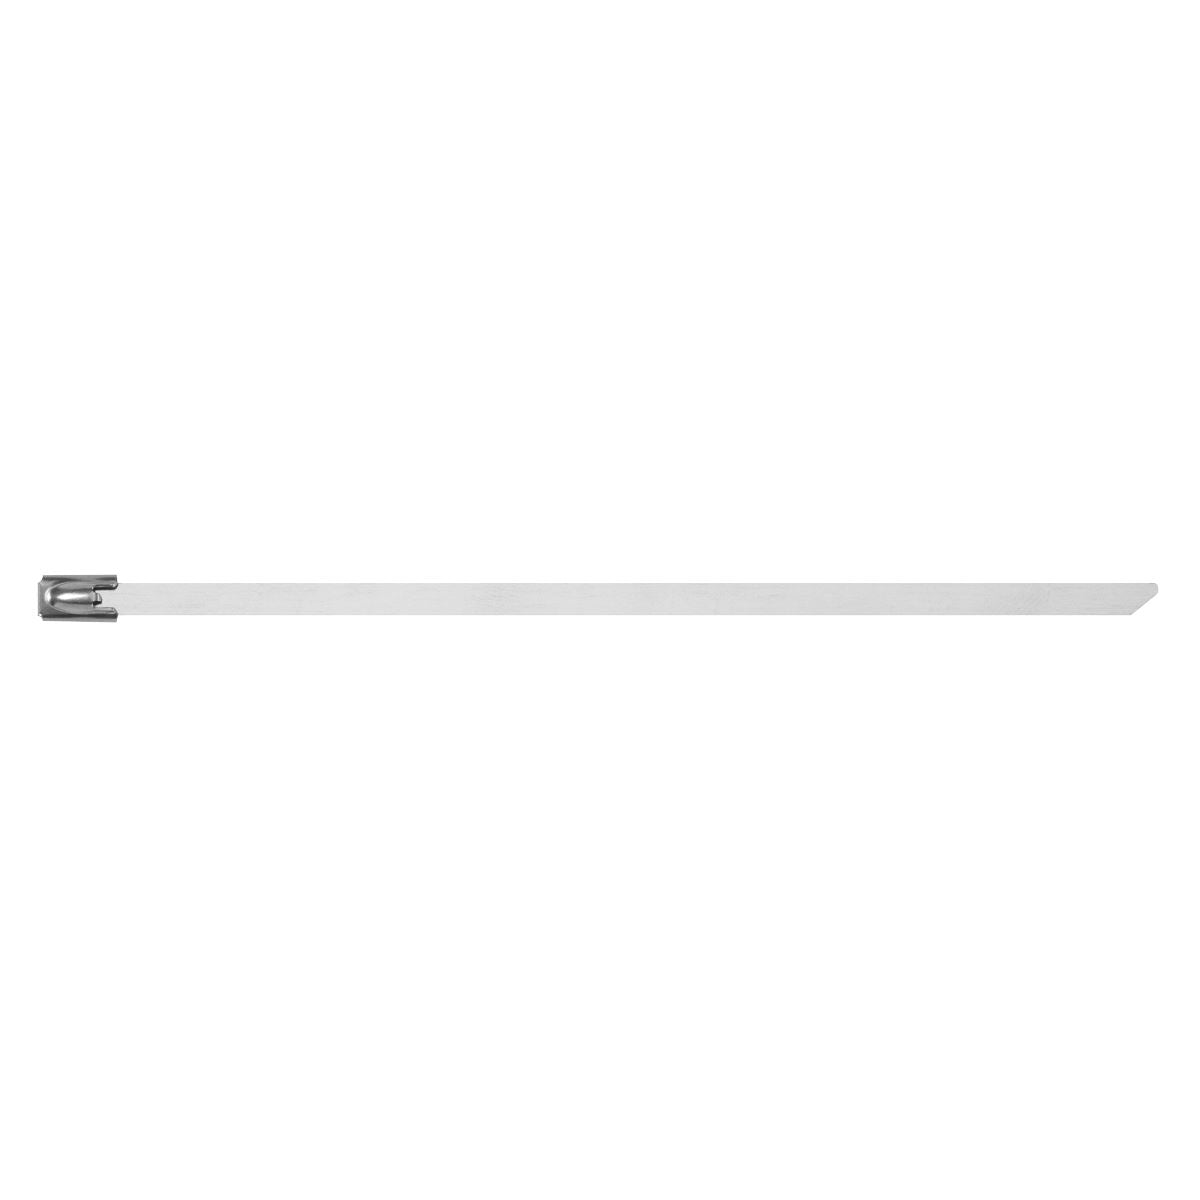 Sealey Stainless Steel Cable Tie 150mm x 4.6mm - Pack of 100